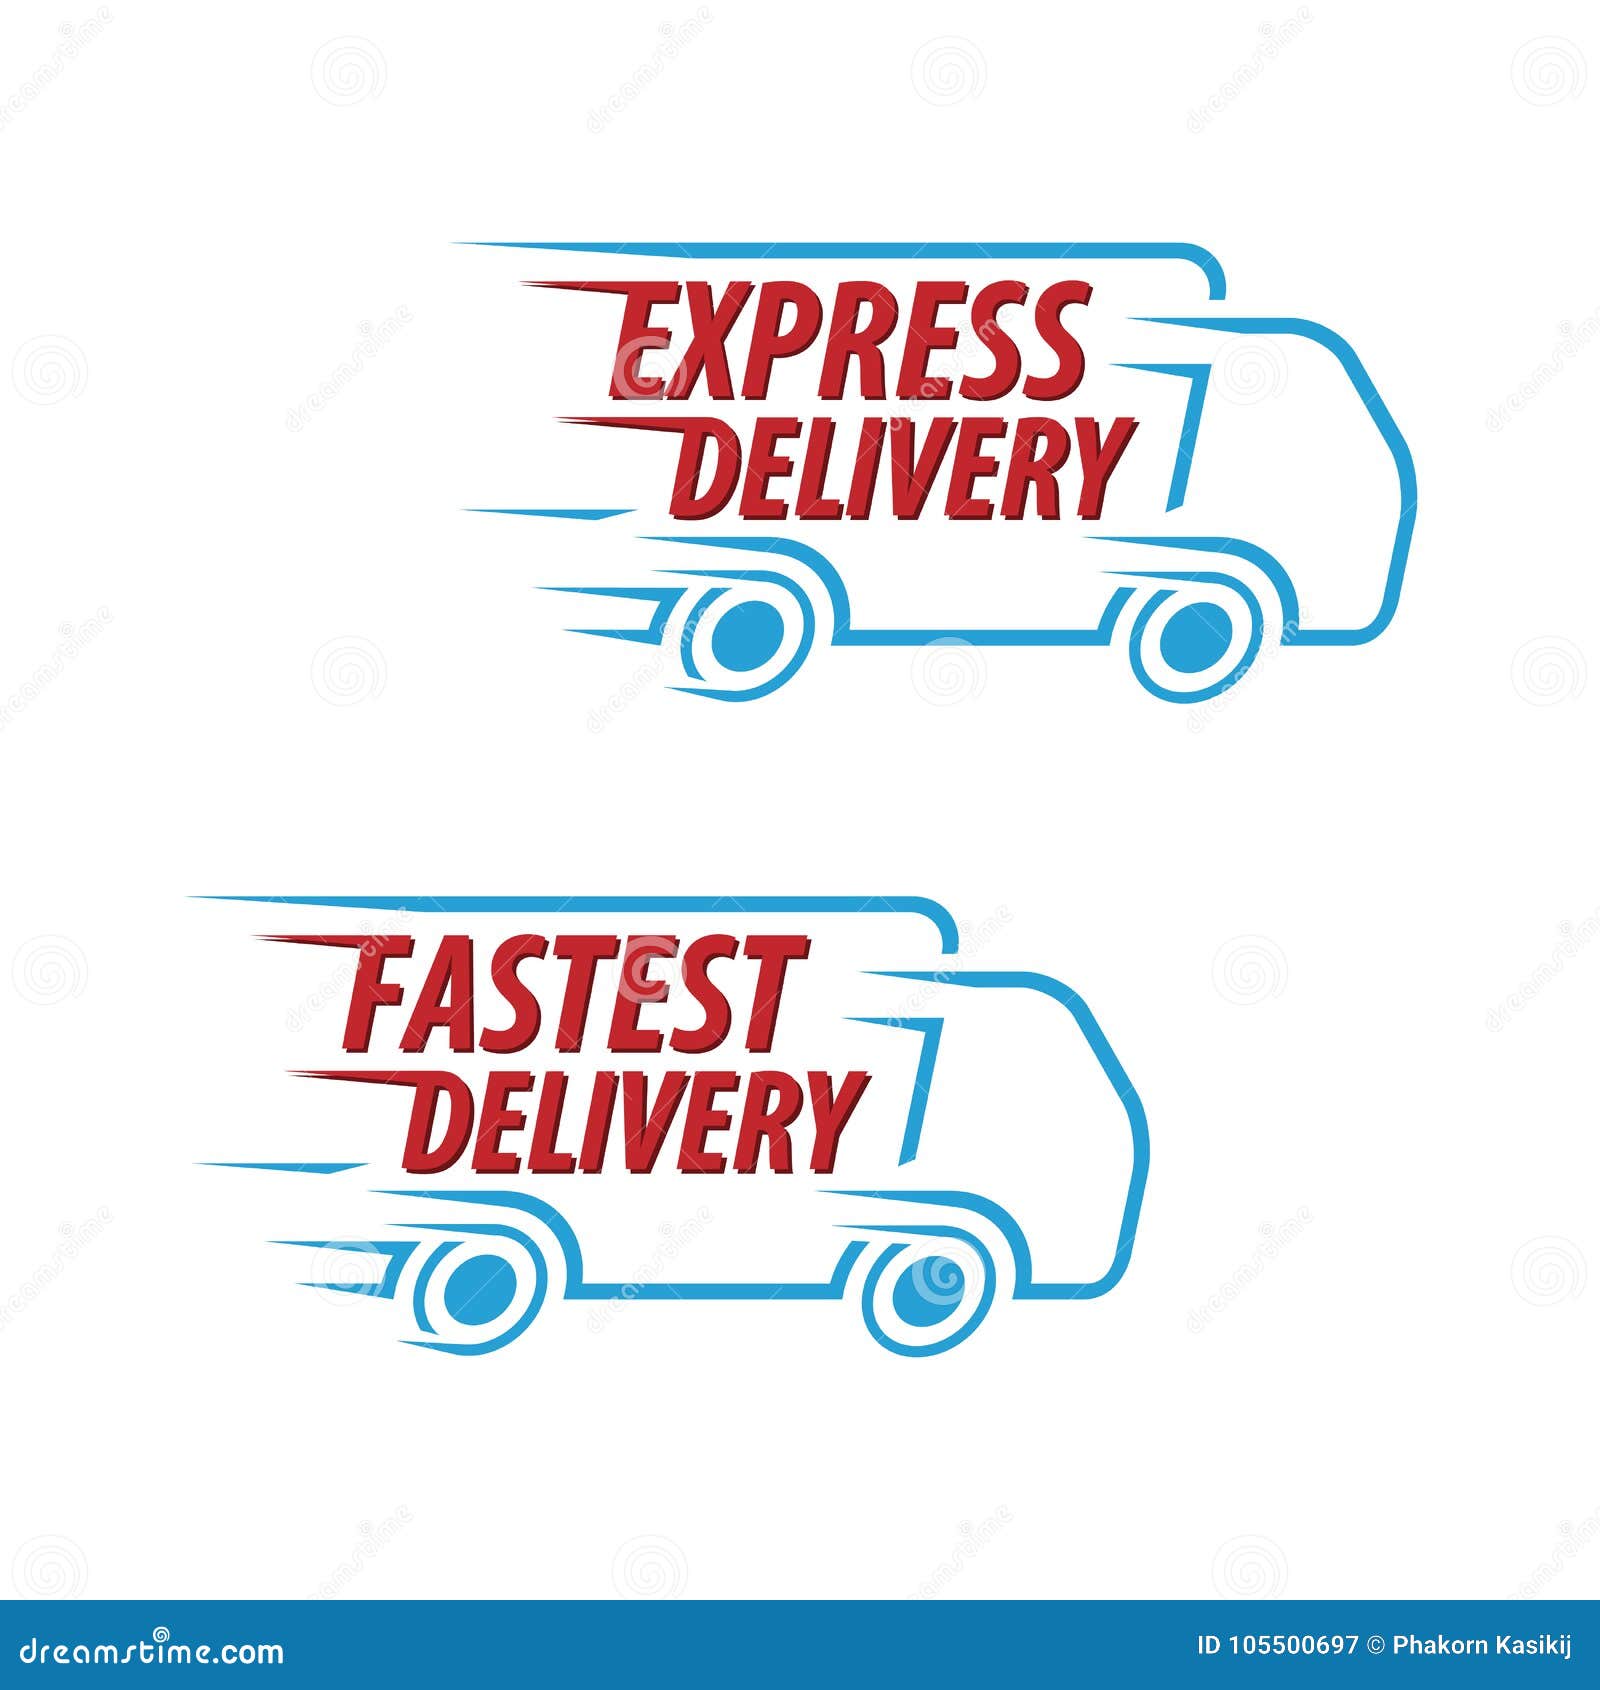 Express Delivery, Fastest Delivery Vector ICon Set. Stock Illustration ...